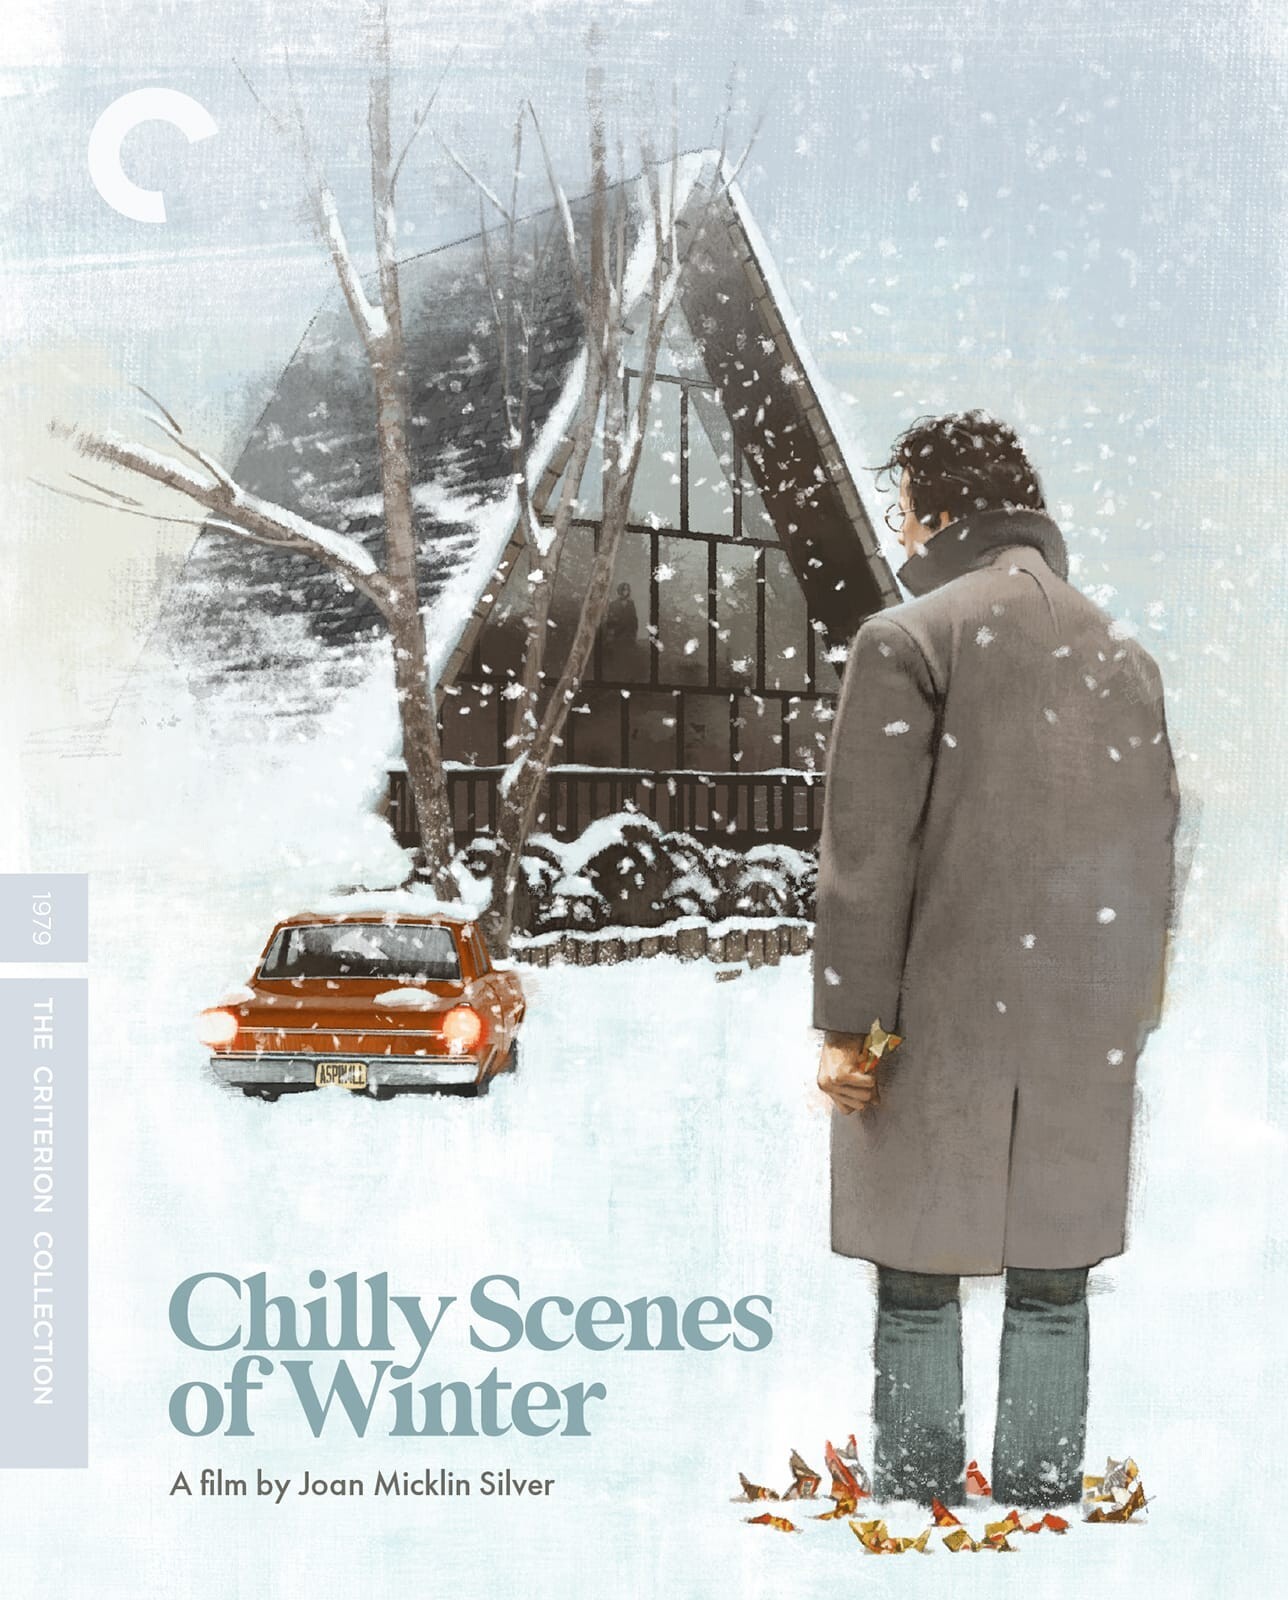 Chilly Scnes of Winter (1979)